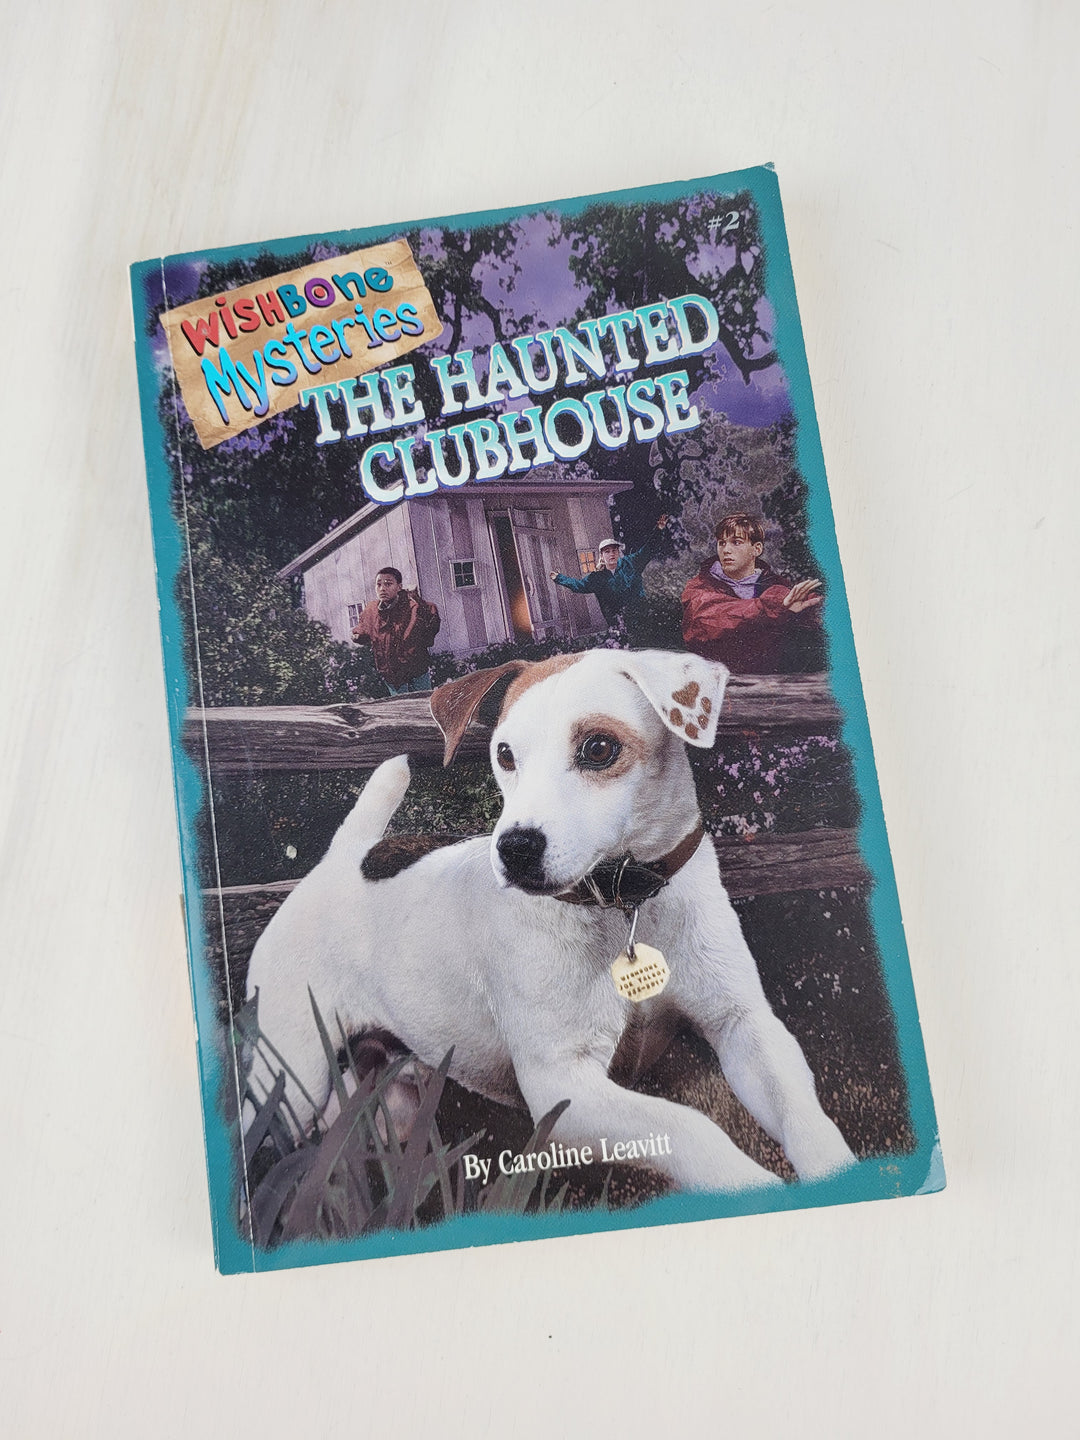 WISHBONE MYSTERIES #2 THE HAUNTED CLUBHOUSE CHAPTER BOOK EUC